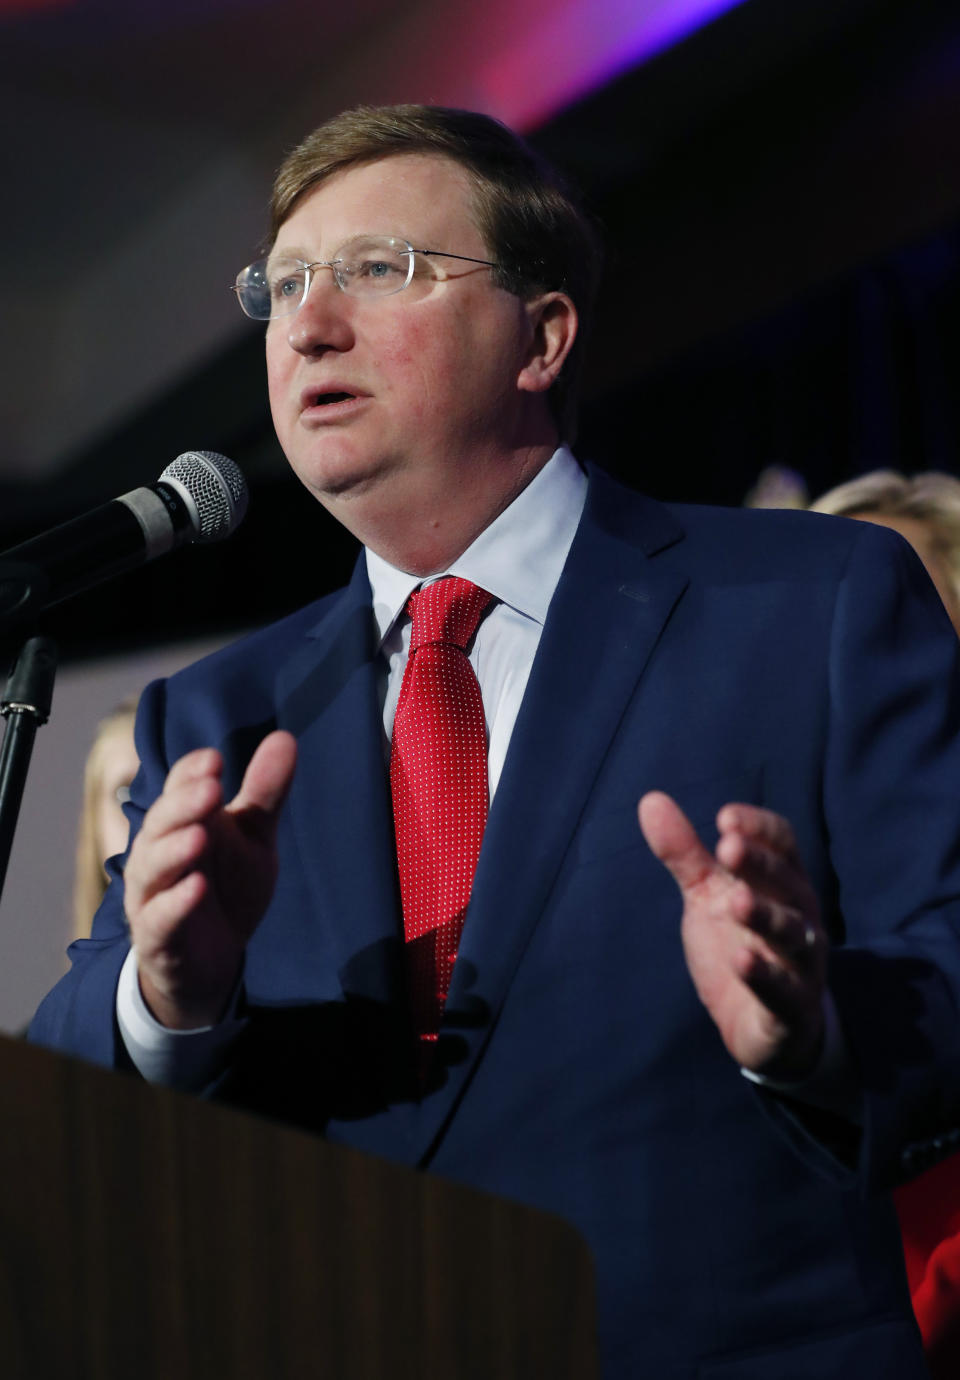 Mississippi Governor-elect Tate Reeves addresses his supporters at a state GOP election night party Tuesday, Nov. 5, 2019, in Jackson, Miss. Reeves, the current lieutenant governor, defeated Democratic Attorney General Jim Hood. (AP Photo/Rogelio V. Solis)